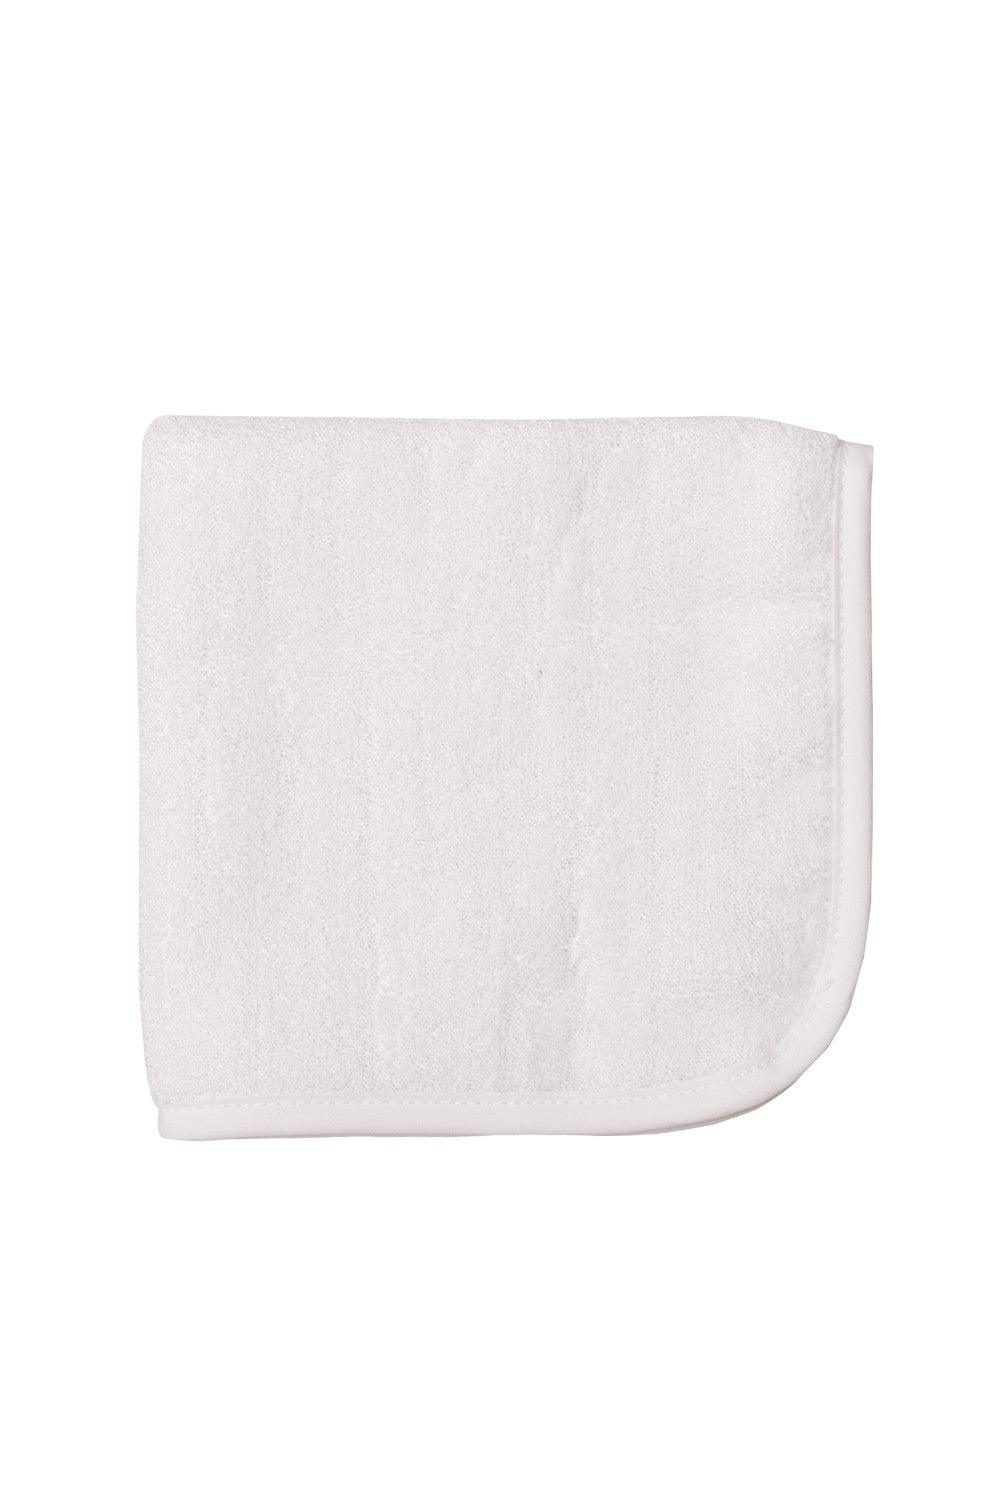 Plain white bamboo baby washcloths with trimmed edges